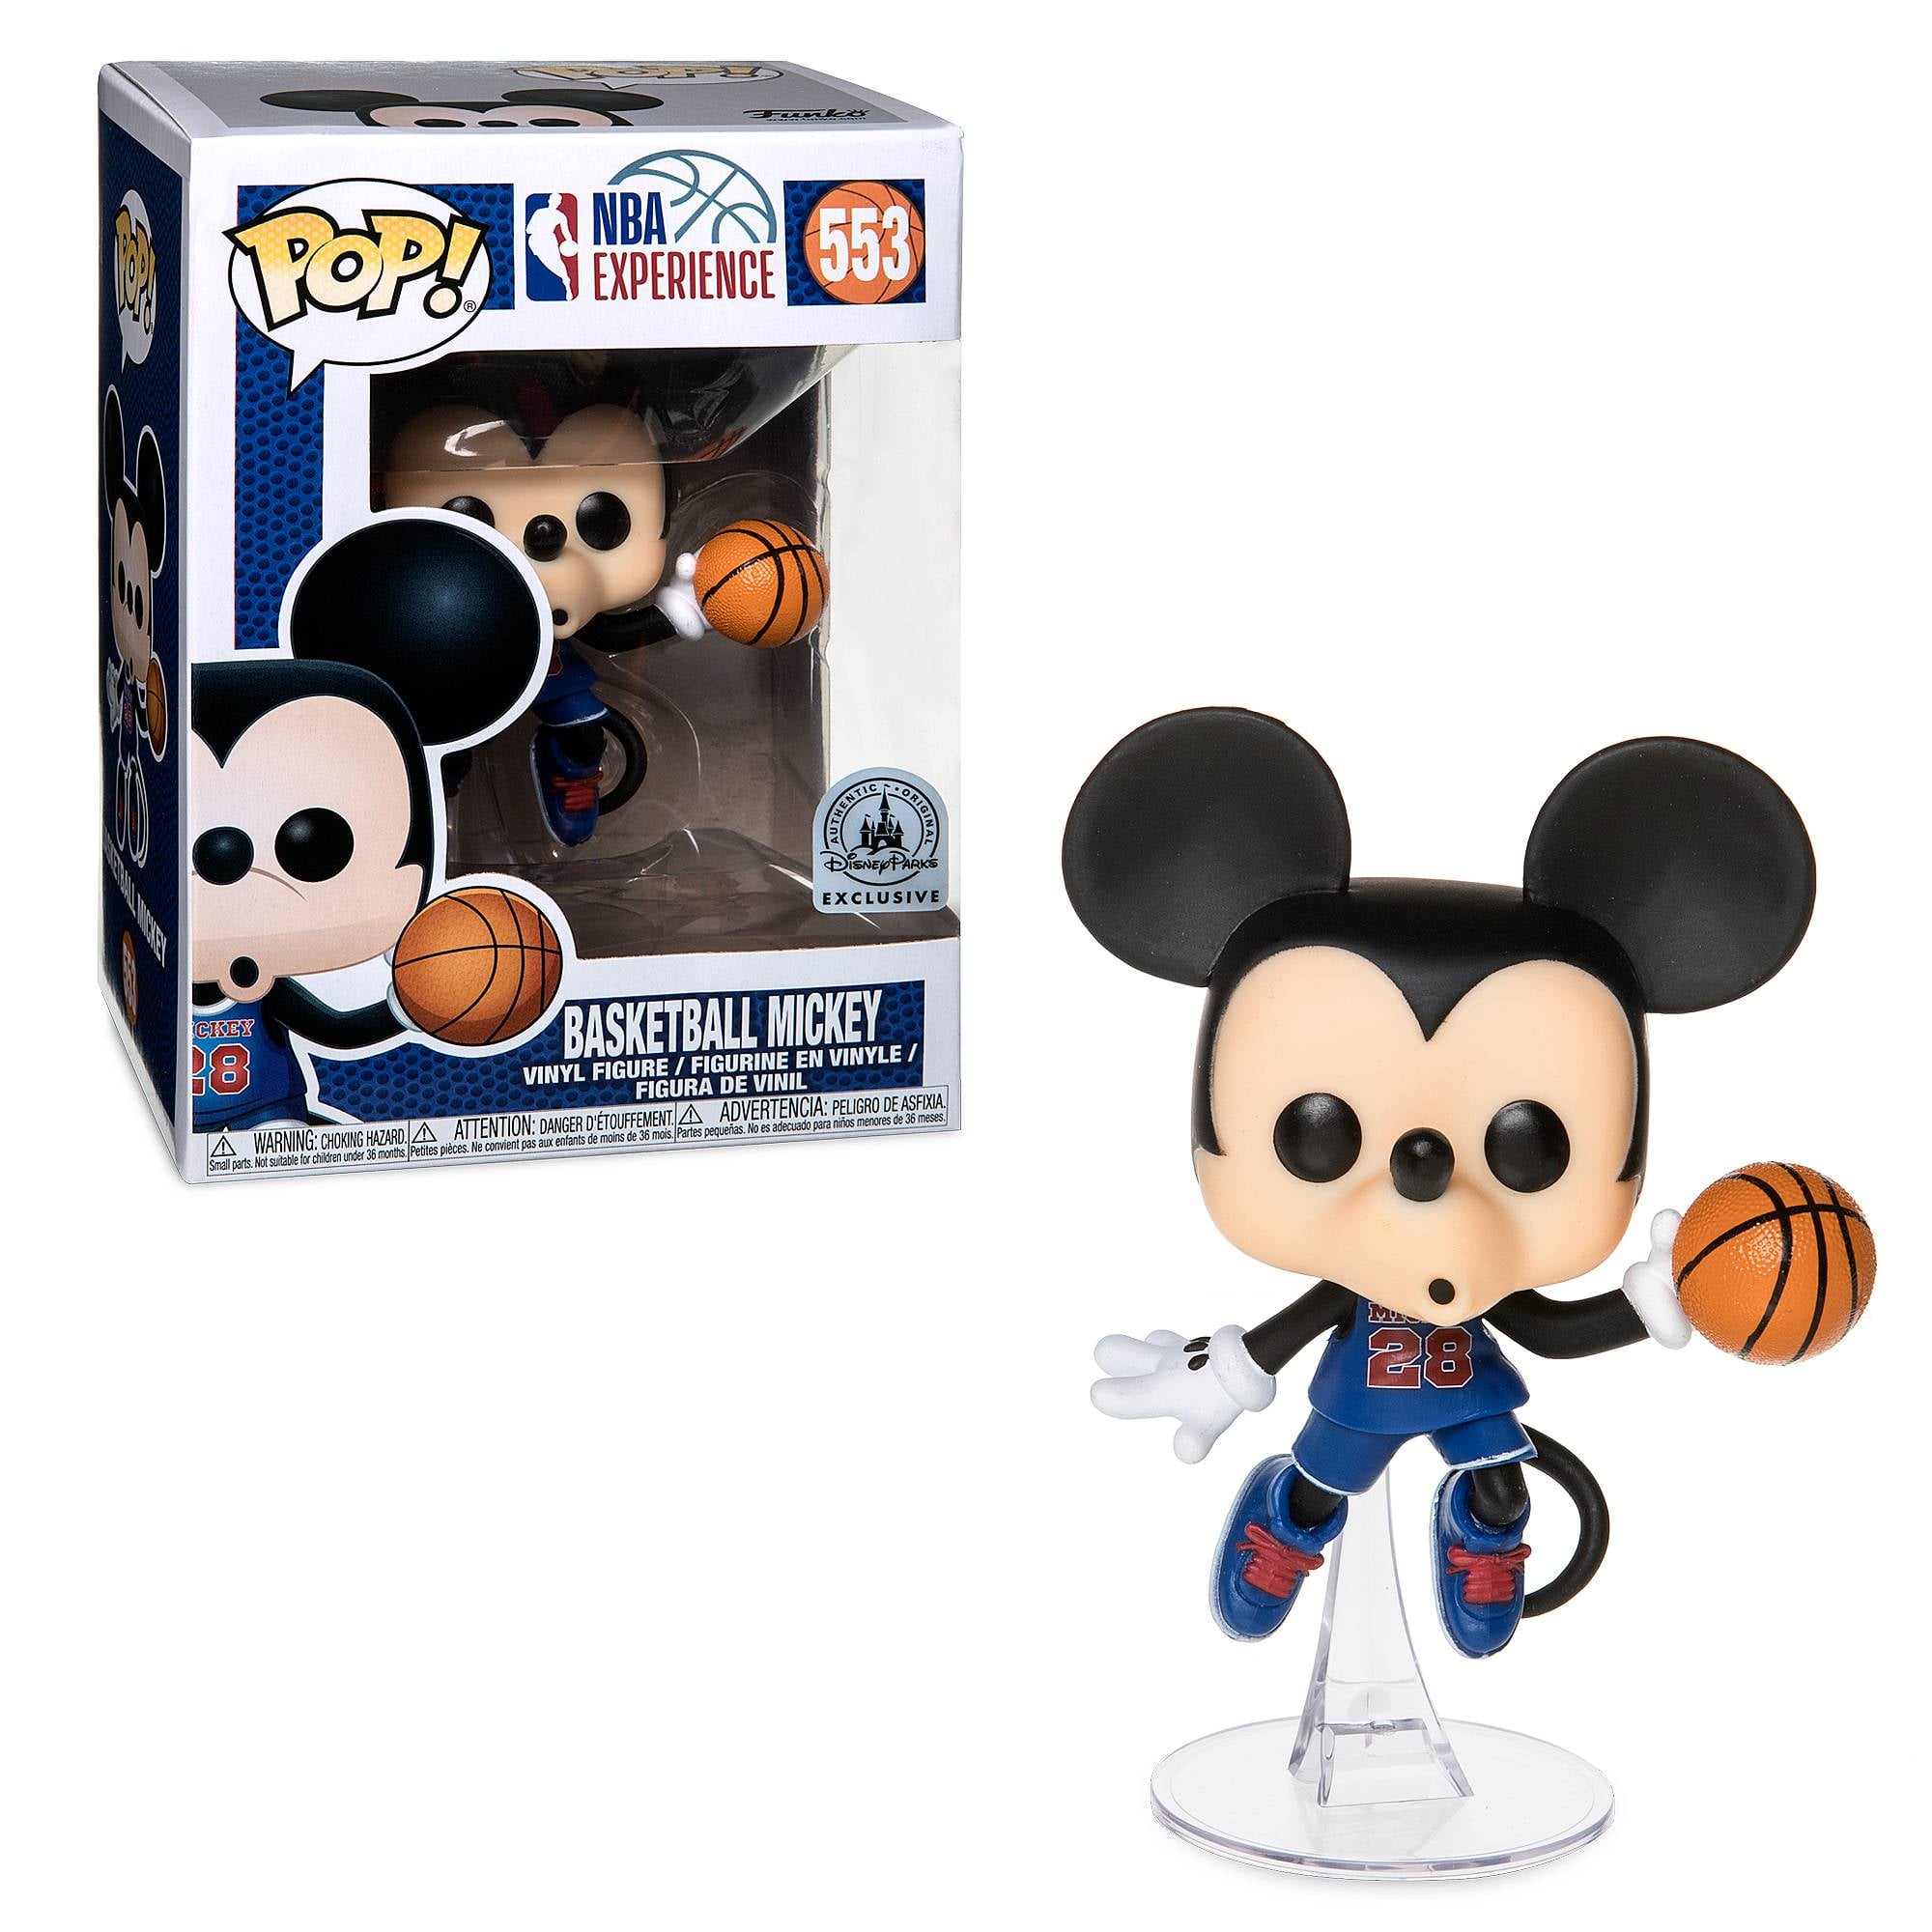 Vinyl Figure NEW Funko Mickey Mouse Pop Mickey Mouse 